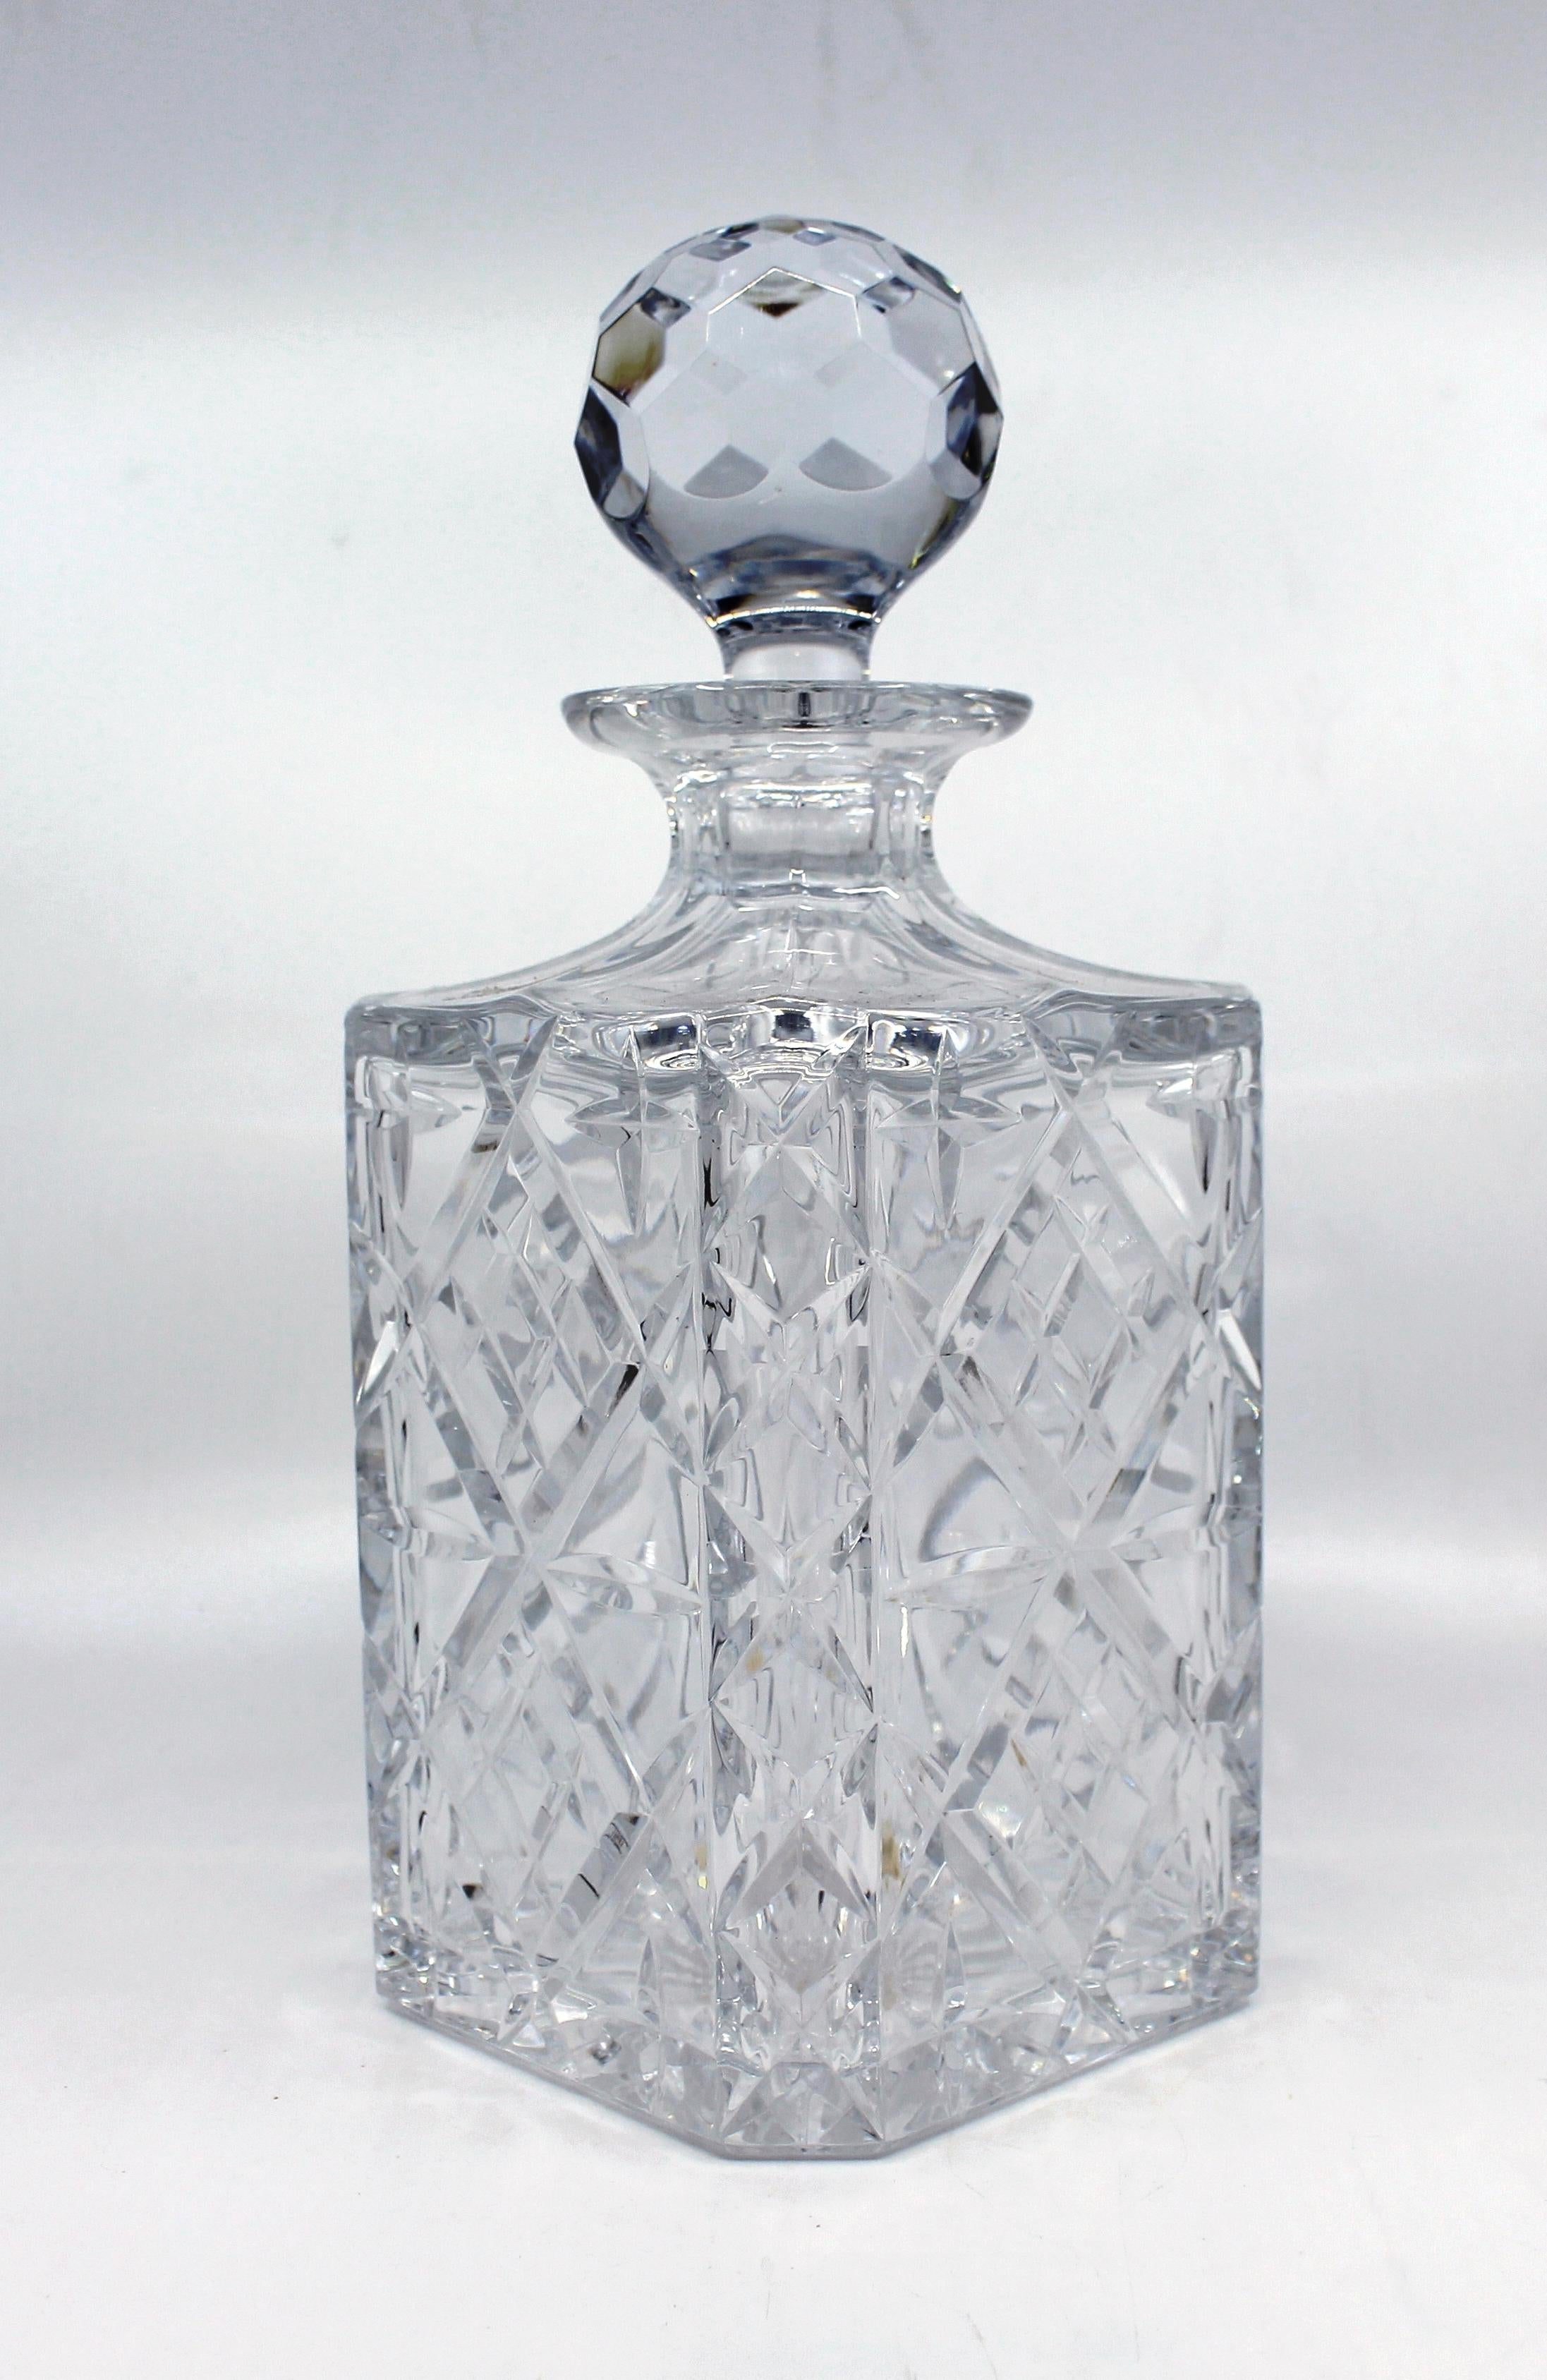 
Origin 
Vintage, 20th century, Stourbridge, England

Measures: Width 
10 cm / 4 in

Height 
24 cm / 9 1/2 in

Glass 
Cut glass

Condition 
Very good condition. Minor light wear commensurate with age
 
 

20th century English cut